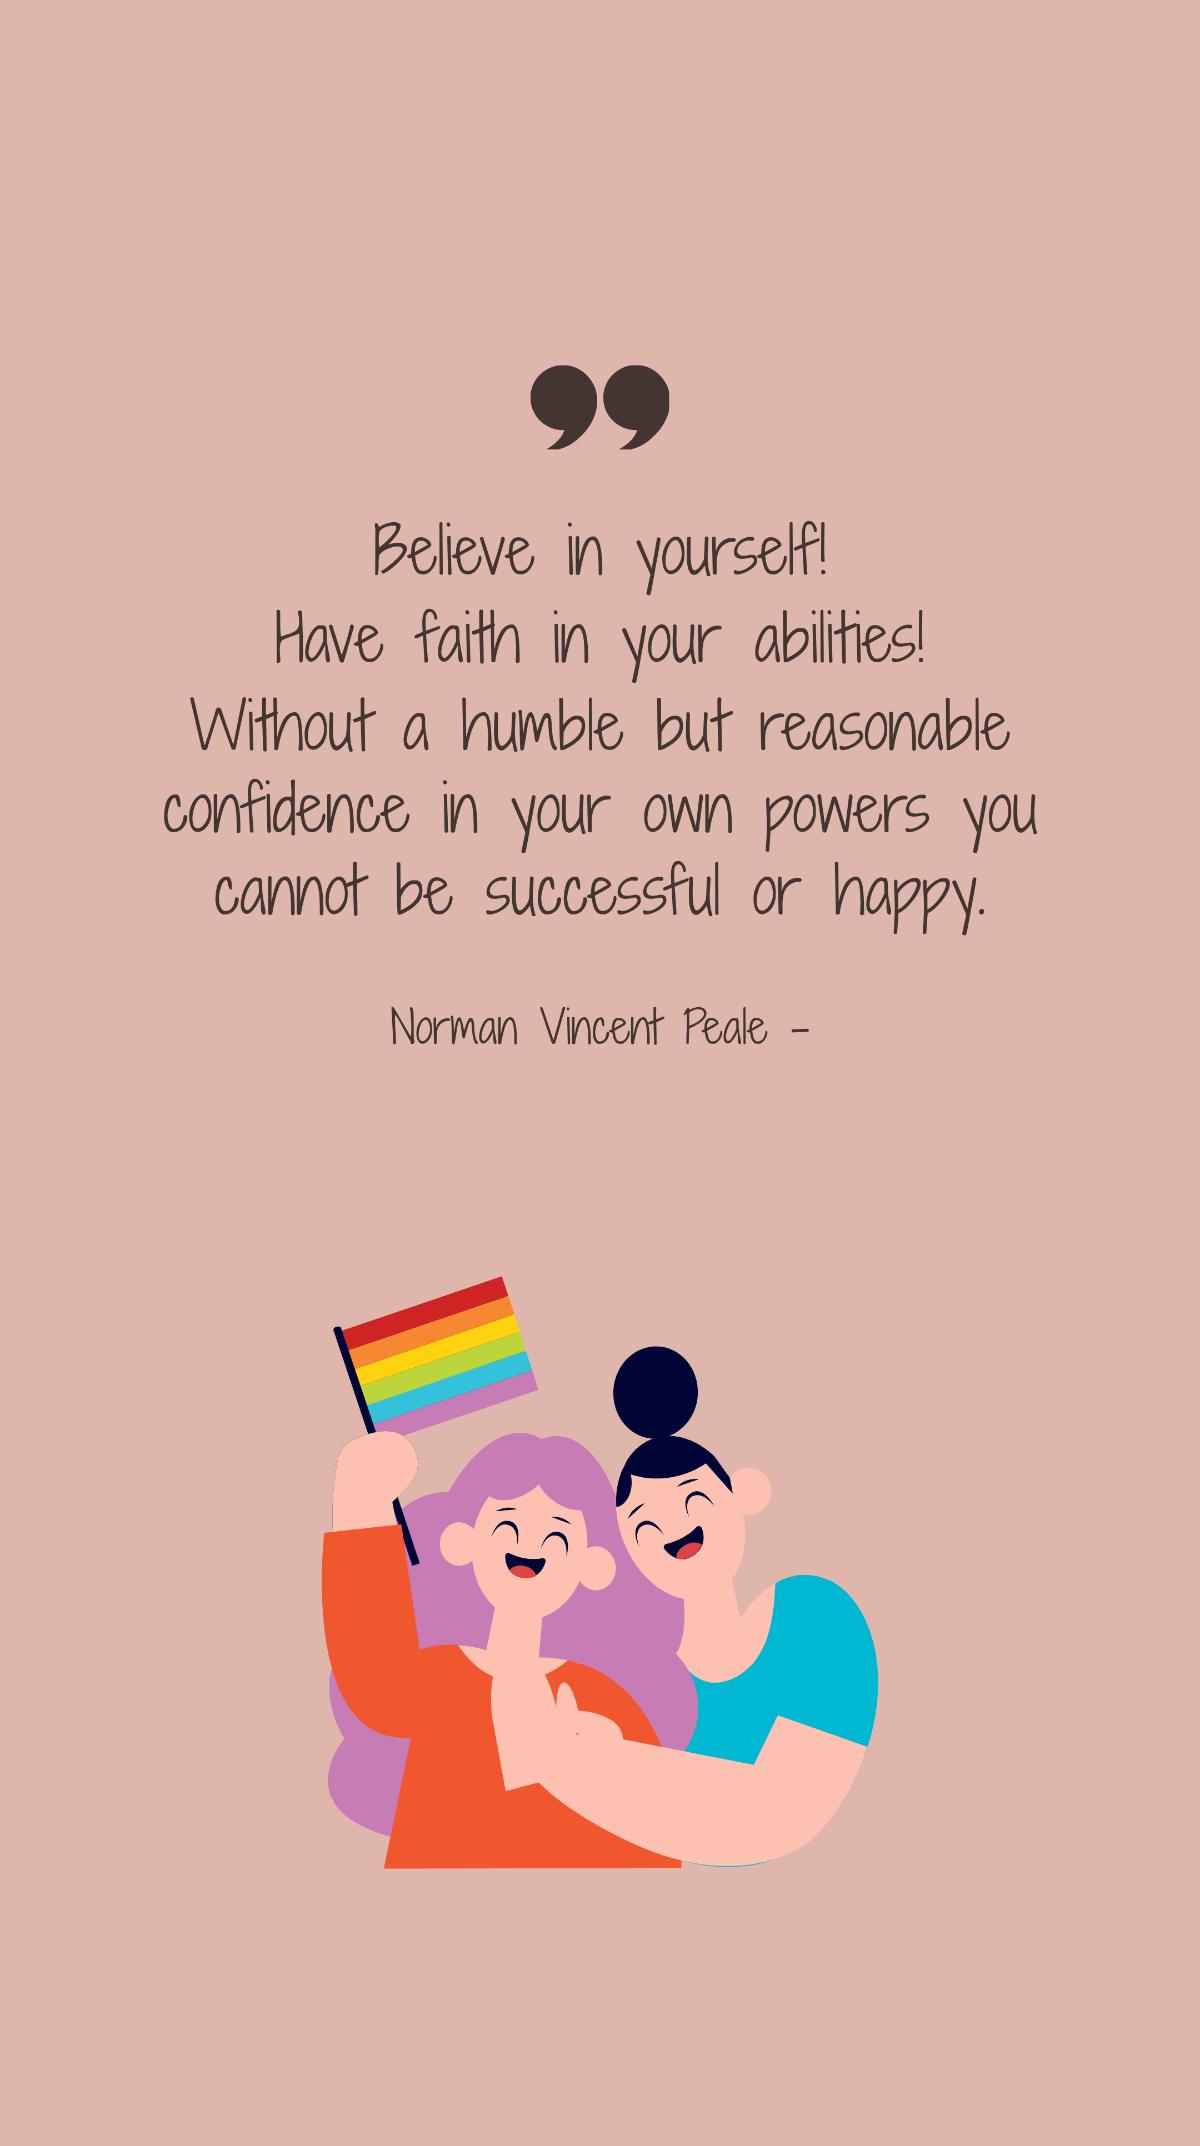 Norman Vincent Peale - Believe in yourself! Have faith in your abilities! Without a humble but reasonable confidence in your own powers you cannot be successful or happy.